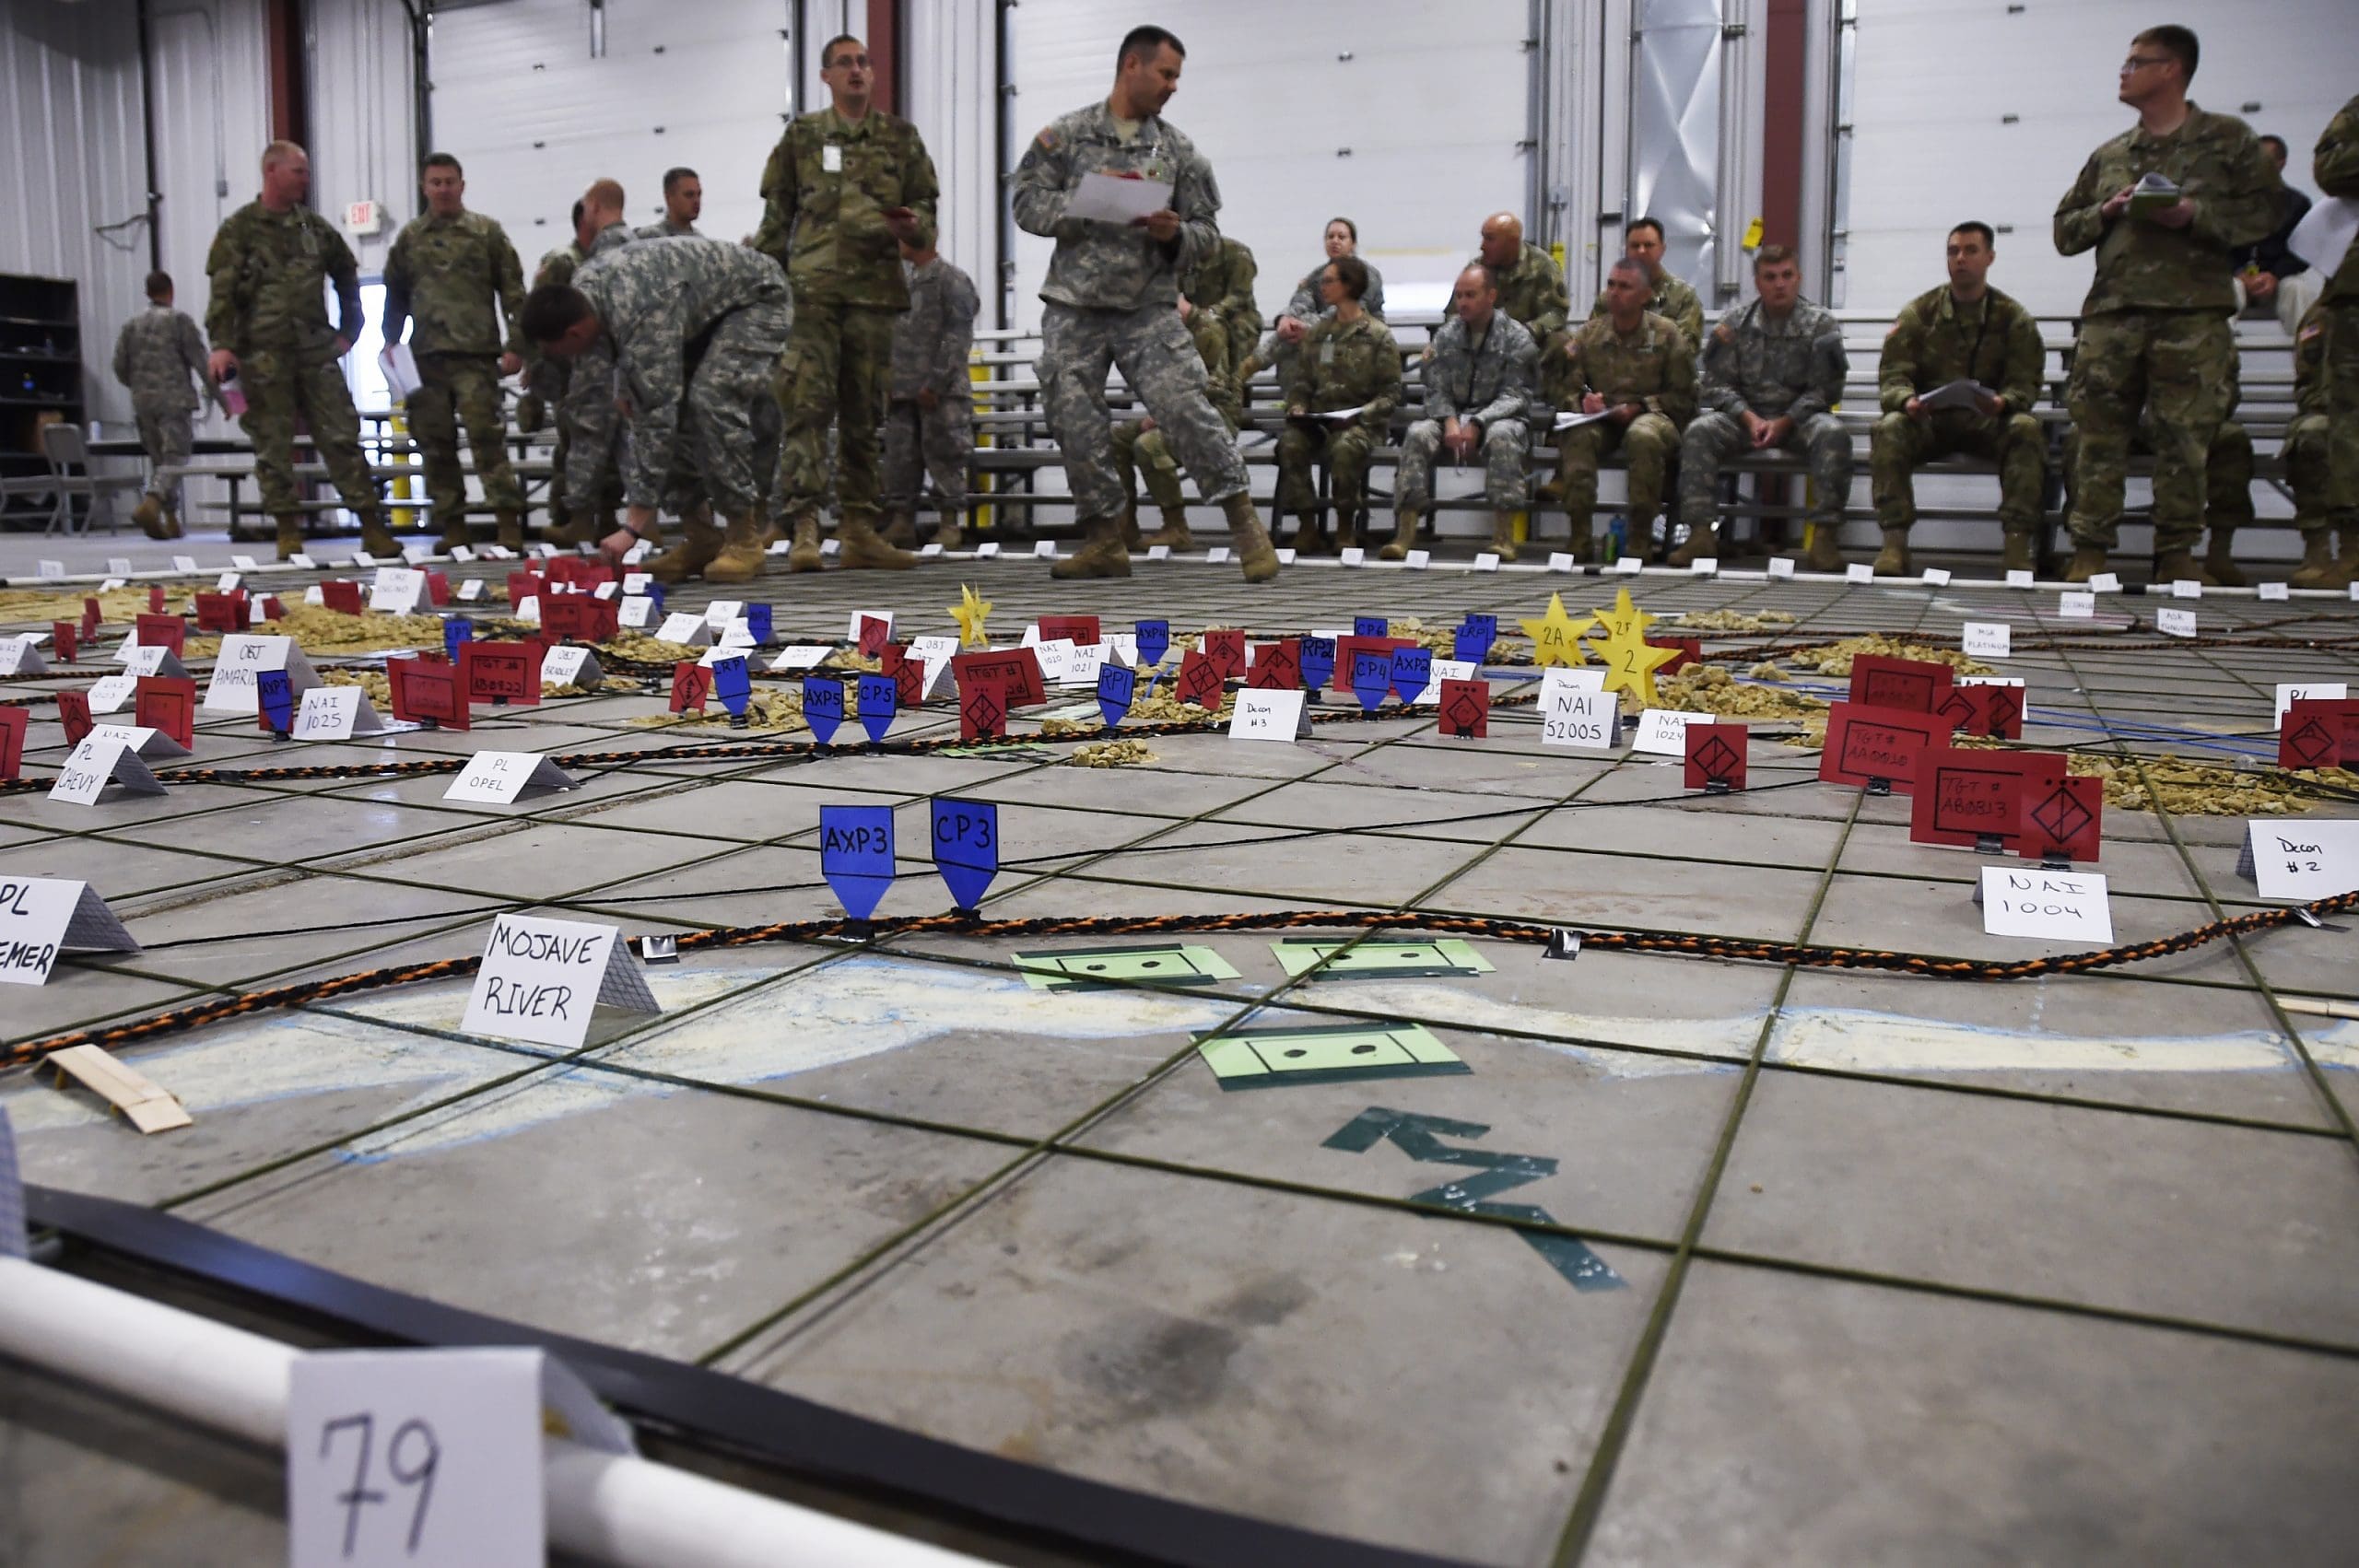 Staff officers and battalion leadership position visual aids — representing brigade assets, phase lines, objectives and enemy units — on a large situation map in a maintenance bay at Fort McCoy, Wis., Aug. 26 as part of a Warfighter combined arms rehearsal. The rehearsal was a walk-through allowing the brigade’s subordinate battalions to indicate their position and actions at various stages of the mock campaign. Wisconsin Department of Military Affairs photo by Vaughn R. Larson